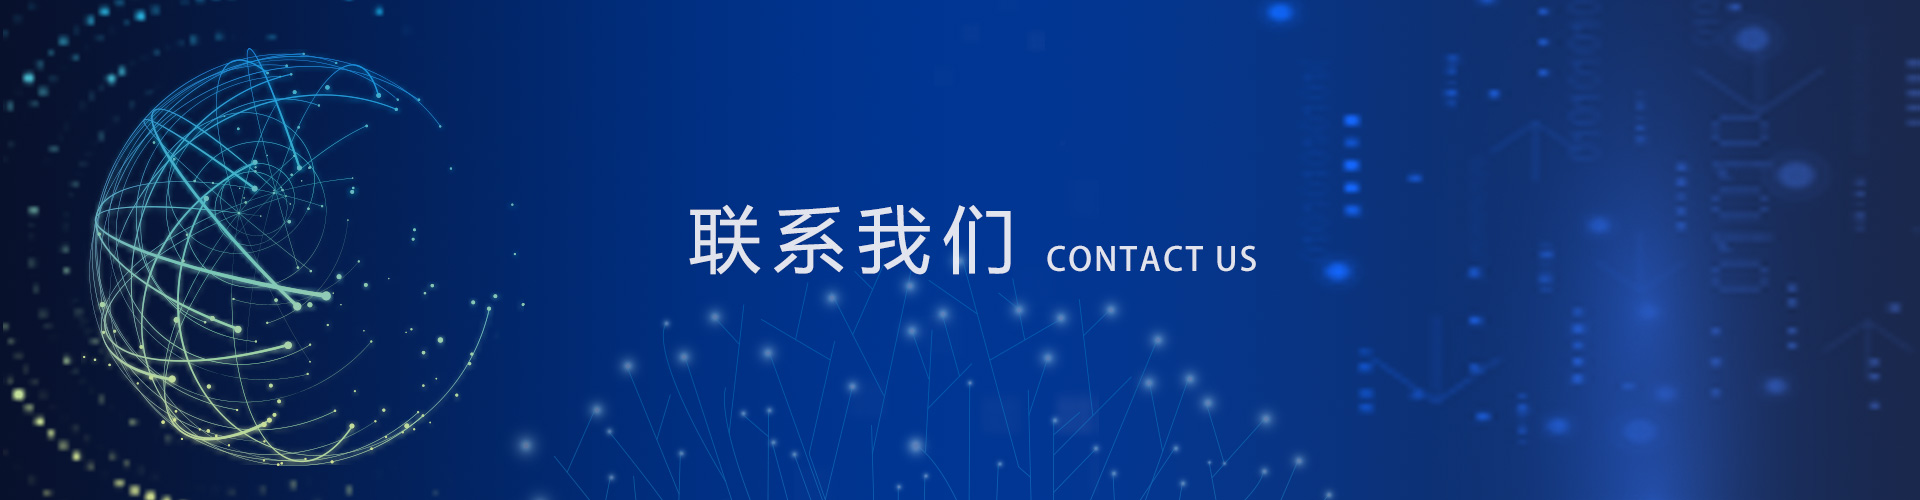 Contact Us_Yuanfu Logistics Group Co.,Ltd.—Serving our customer to focus on core business,win-win on the supply chain【official website】